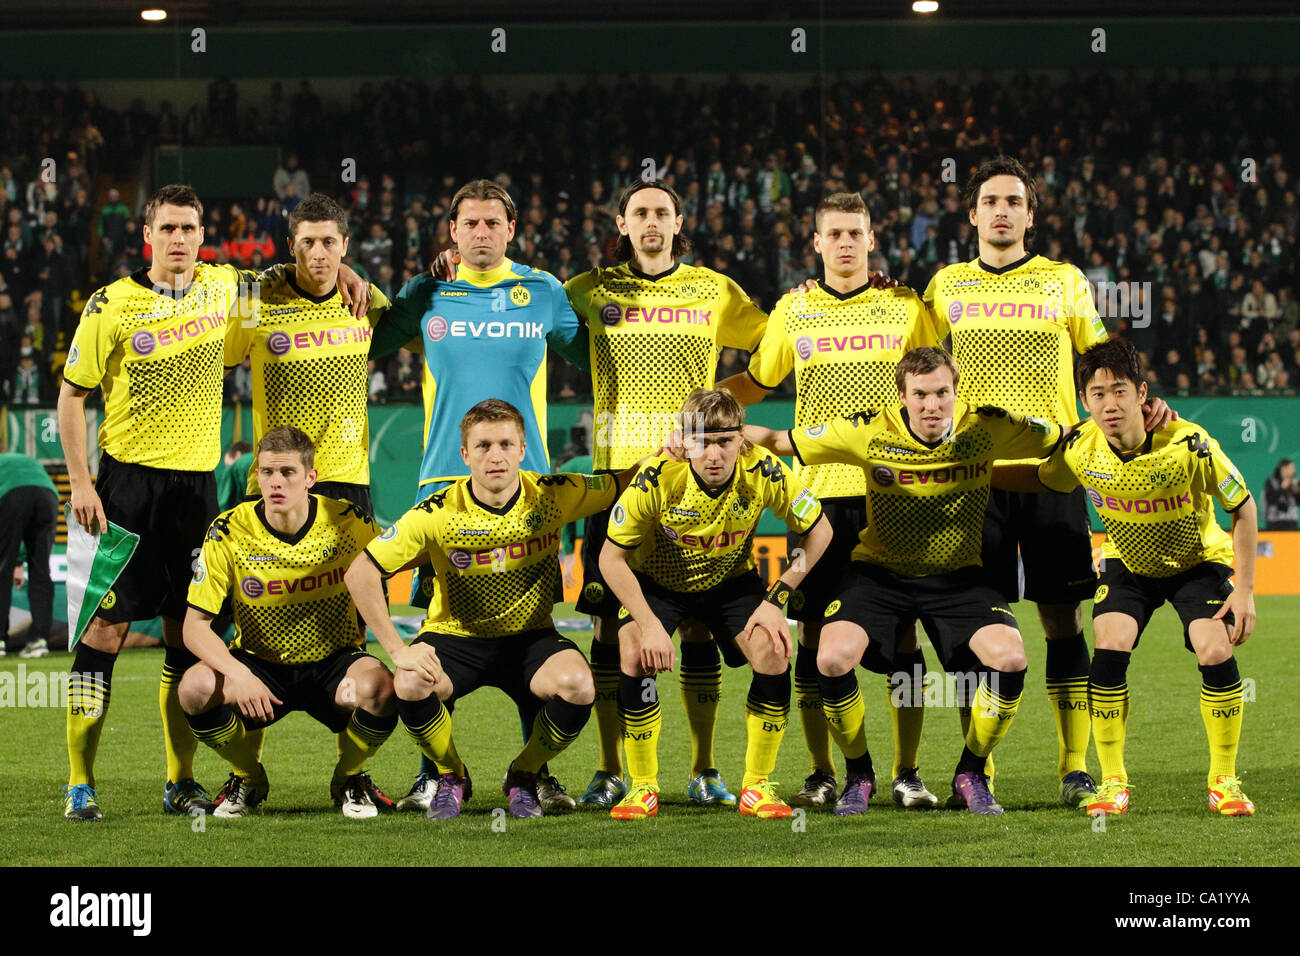 Dortmund Team Group Line Up March 12 Football Soccer The Semifinal Match Of The German Soccer Cup Between Greuther Fuerth And Borussia Dortmund In Fuerth Germany Photo By Aflo 2268 Stock Photo Alamy